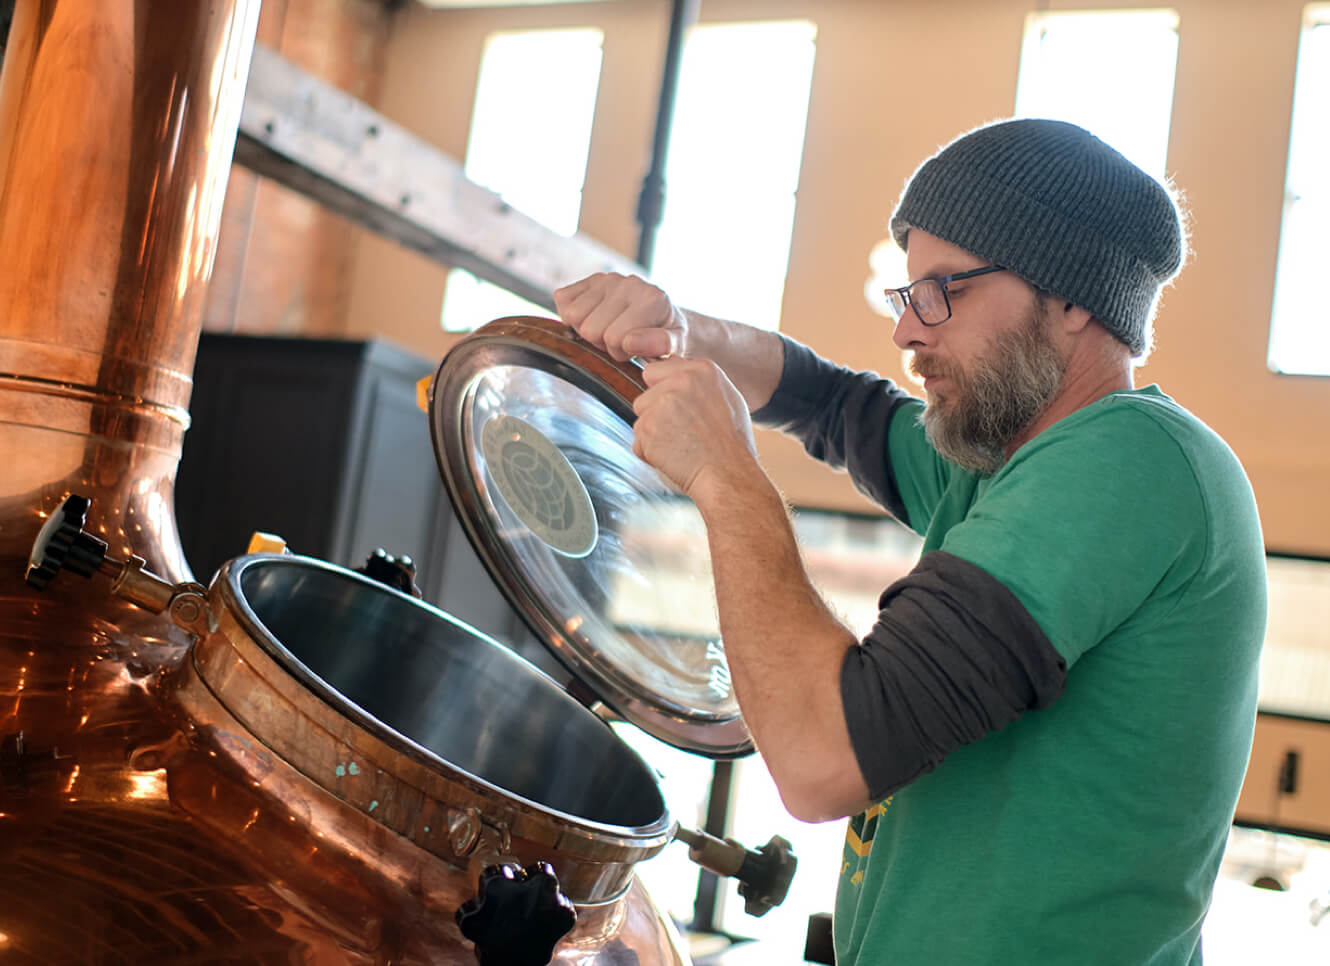 Tangled Roots brewer opening up copper brewing kettle